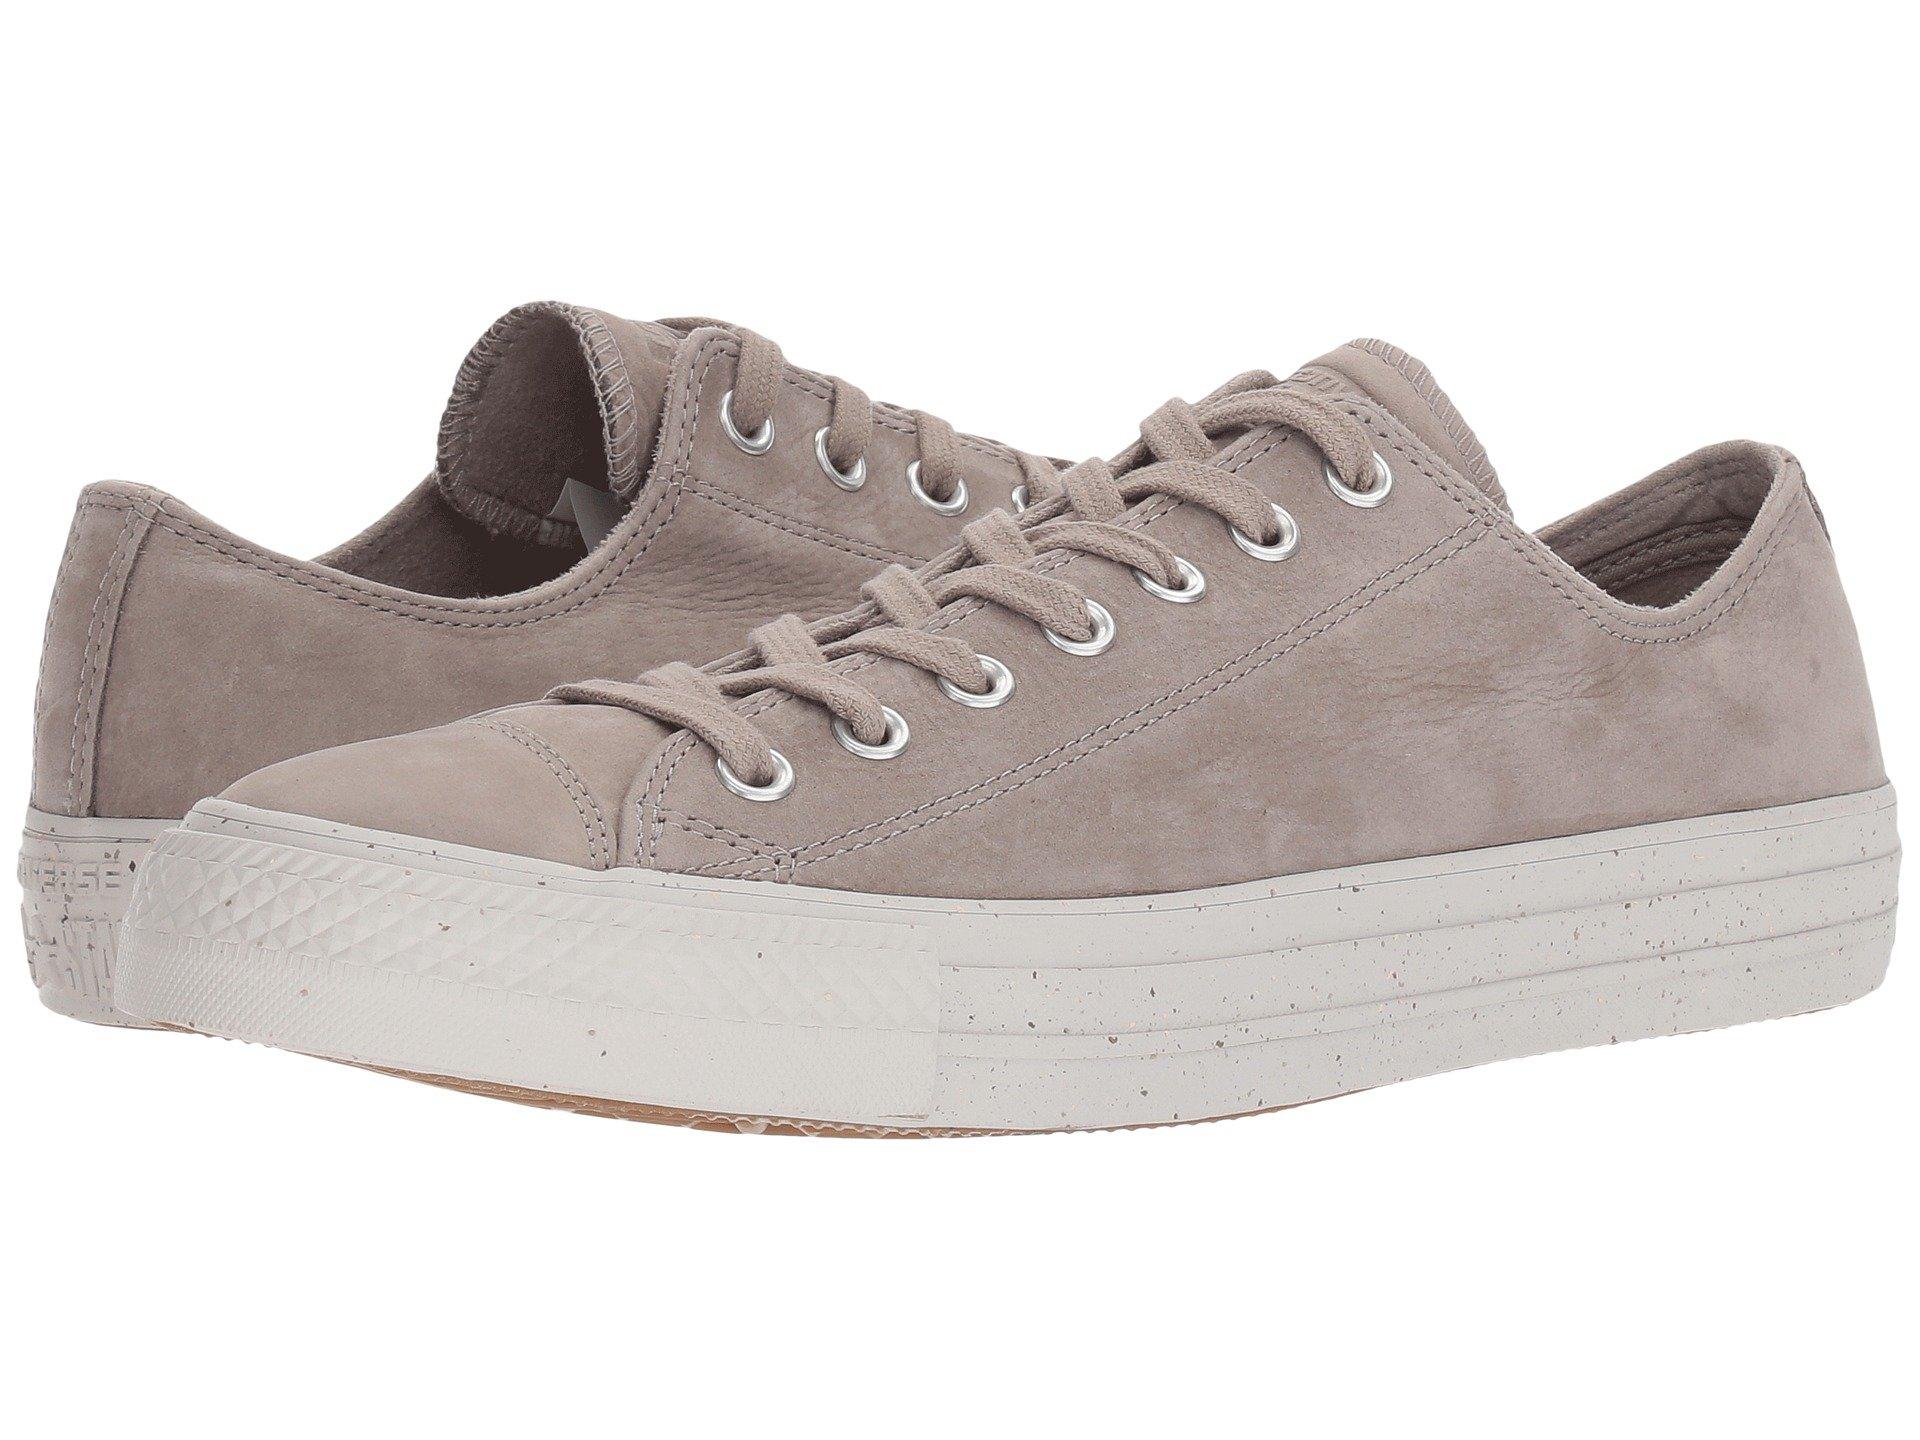 Converse Chuck Taylor All Star Nubuck Ox In Malted/engine Smoke/pale Putty  | ModeSens